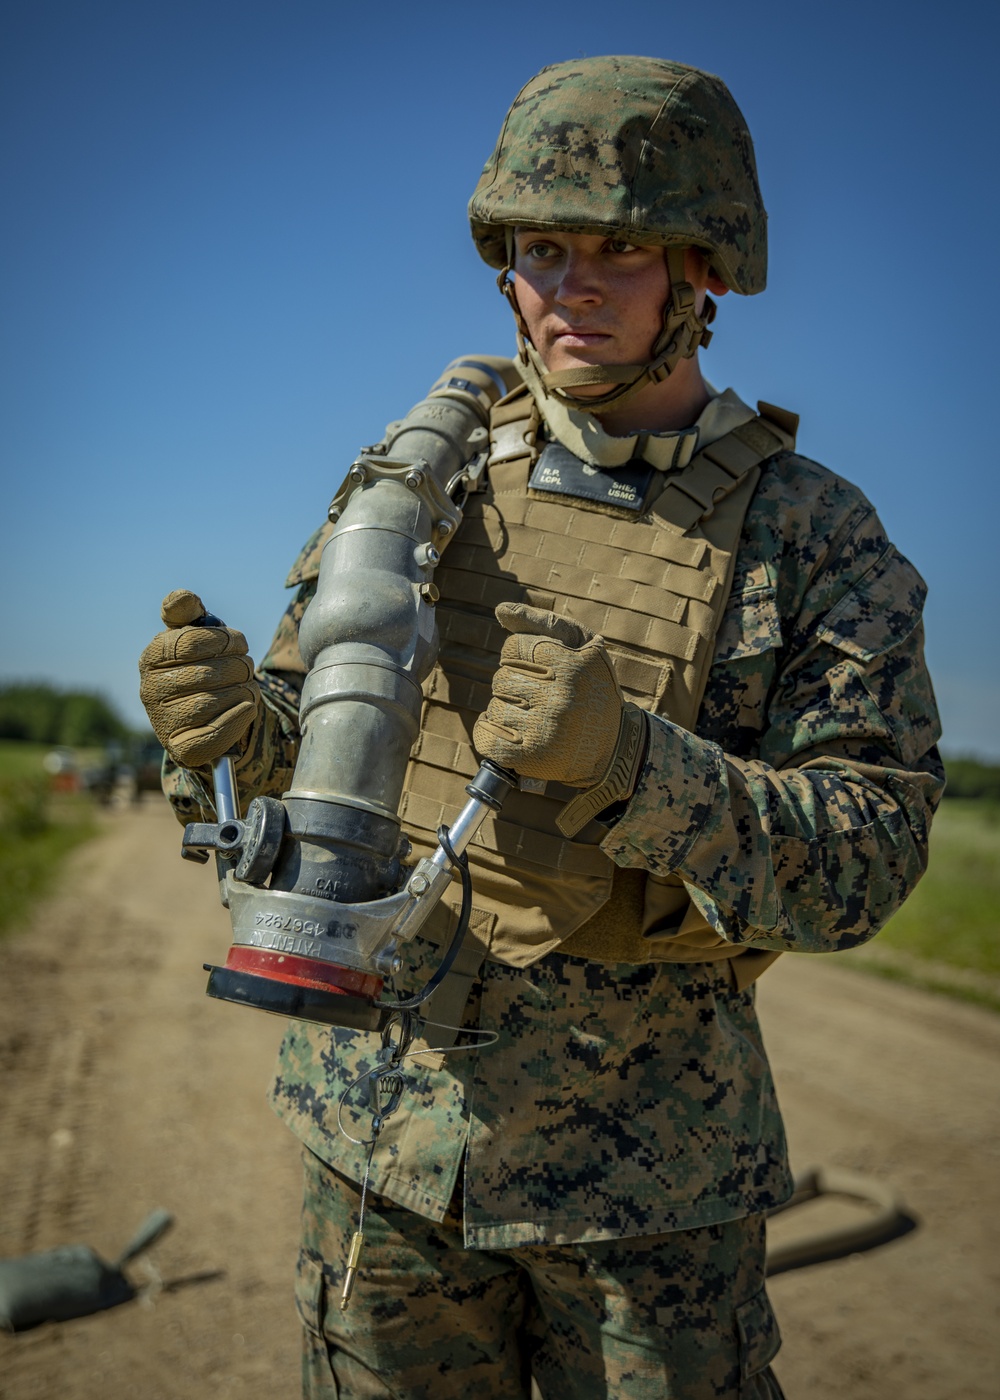 U.S. Marines conduct Forward Arming and Refueling Point operations in Canada